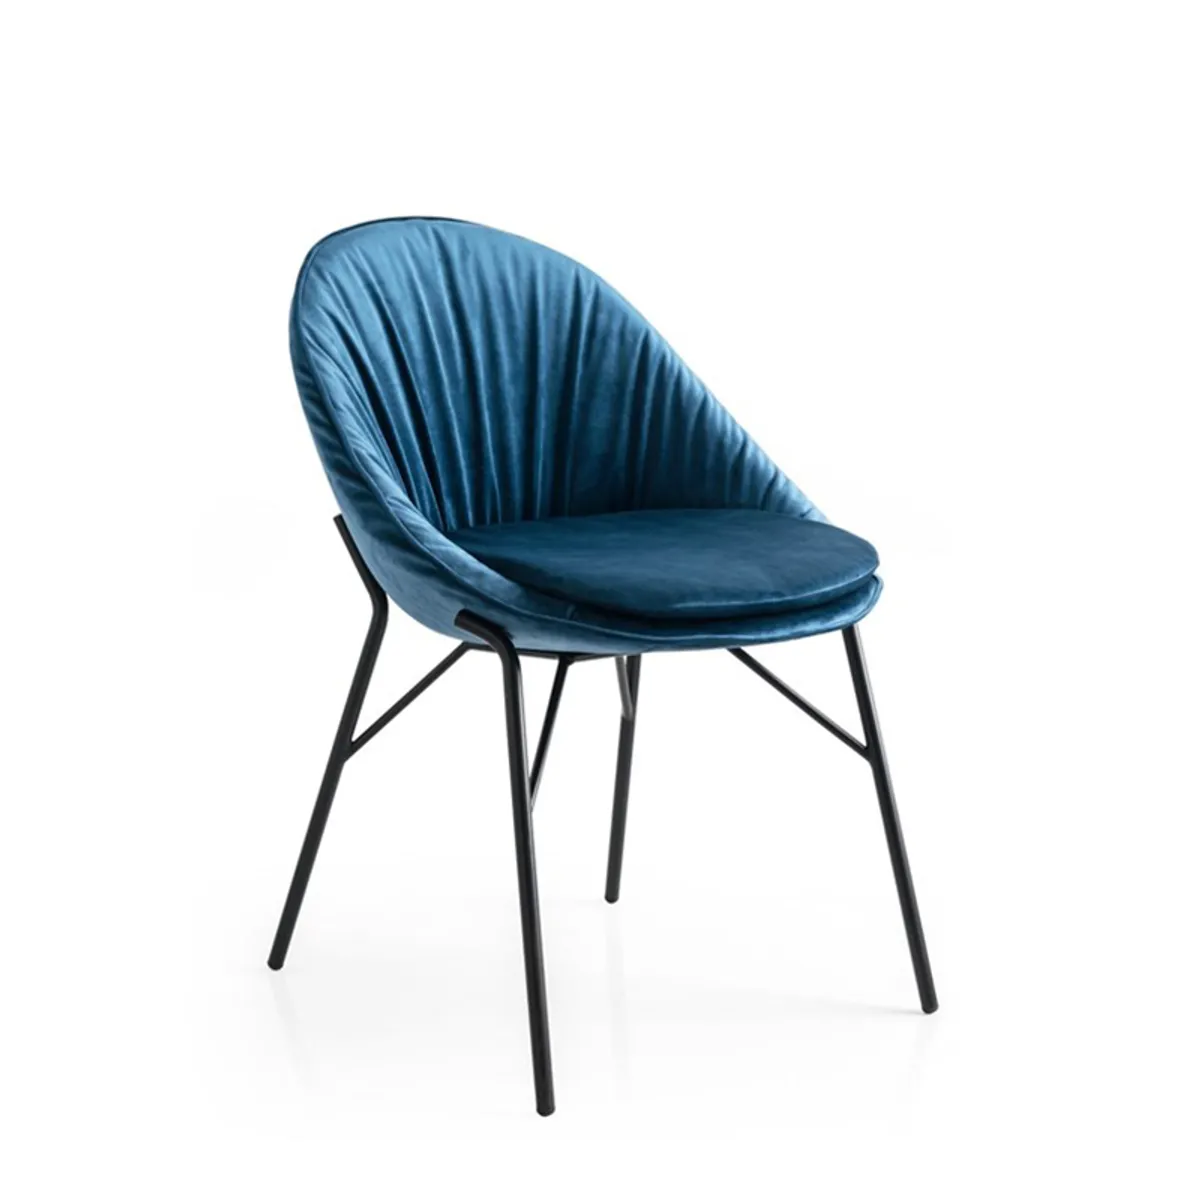 Lilly Chair Blue Velvet Inside Out Contracts